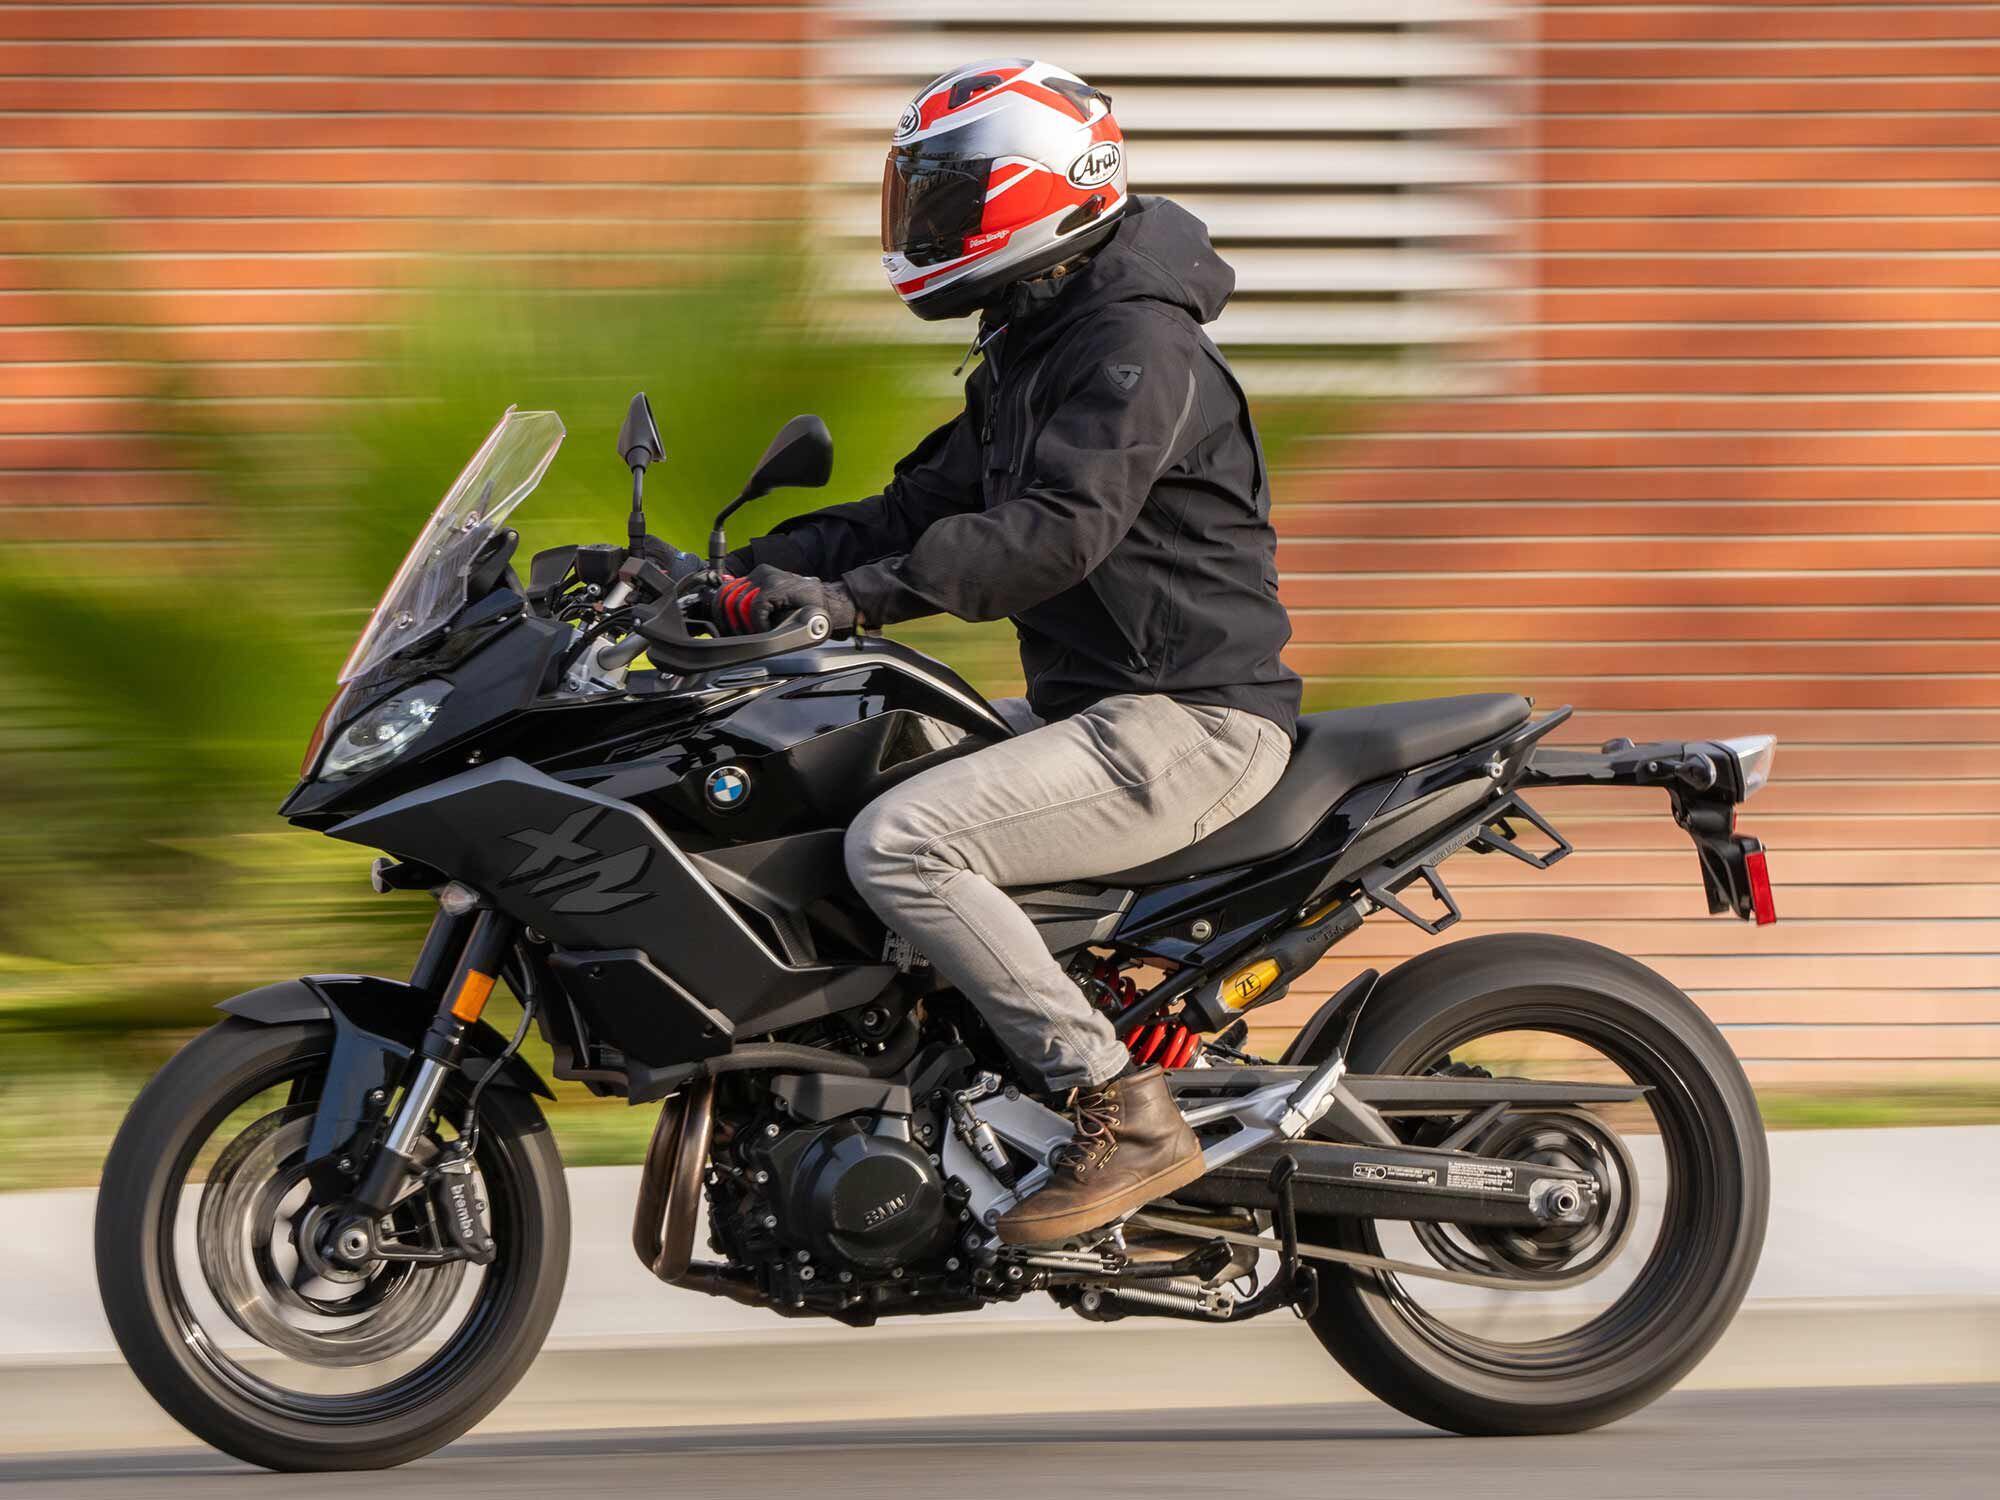 Ergonomically, the F 900 XR is a tad small for taller riders, yet the ergonomic proportions are set well making it comfortable for a wide range of riders.